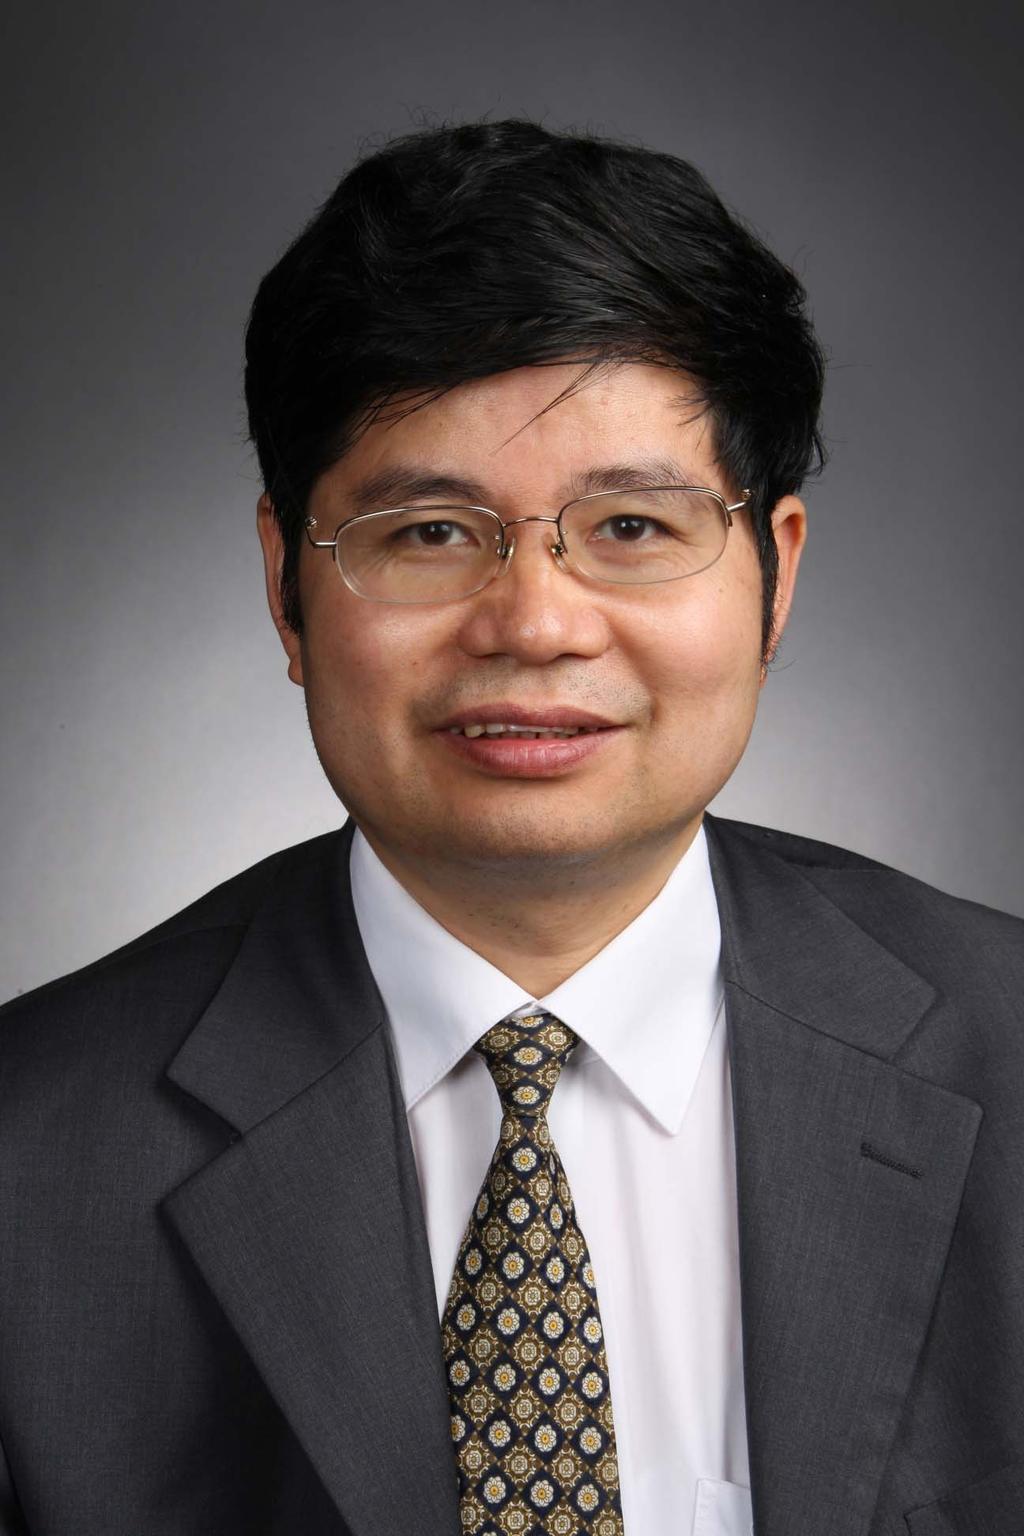 His research interests include real-time indoor localization system, and next generation self-organized network. Dihu Chen received B. Sc. and M. Phil.